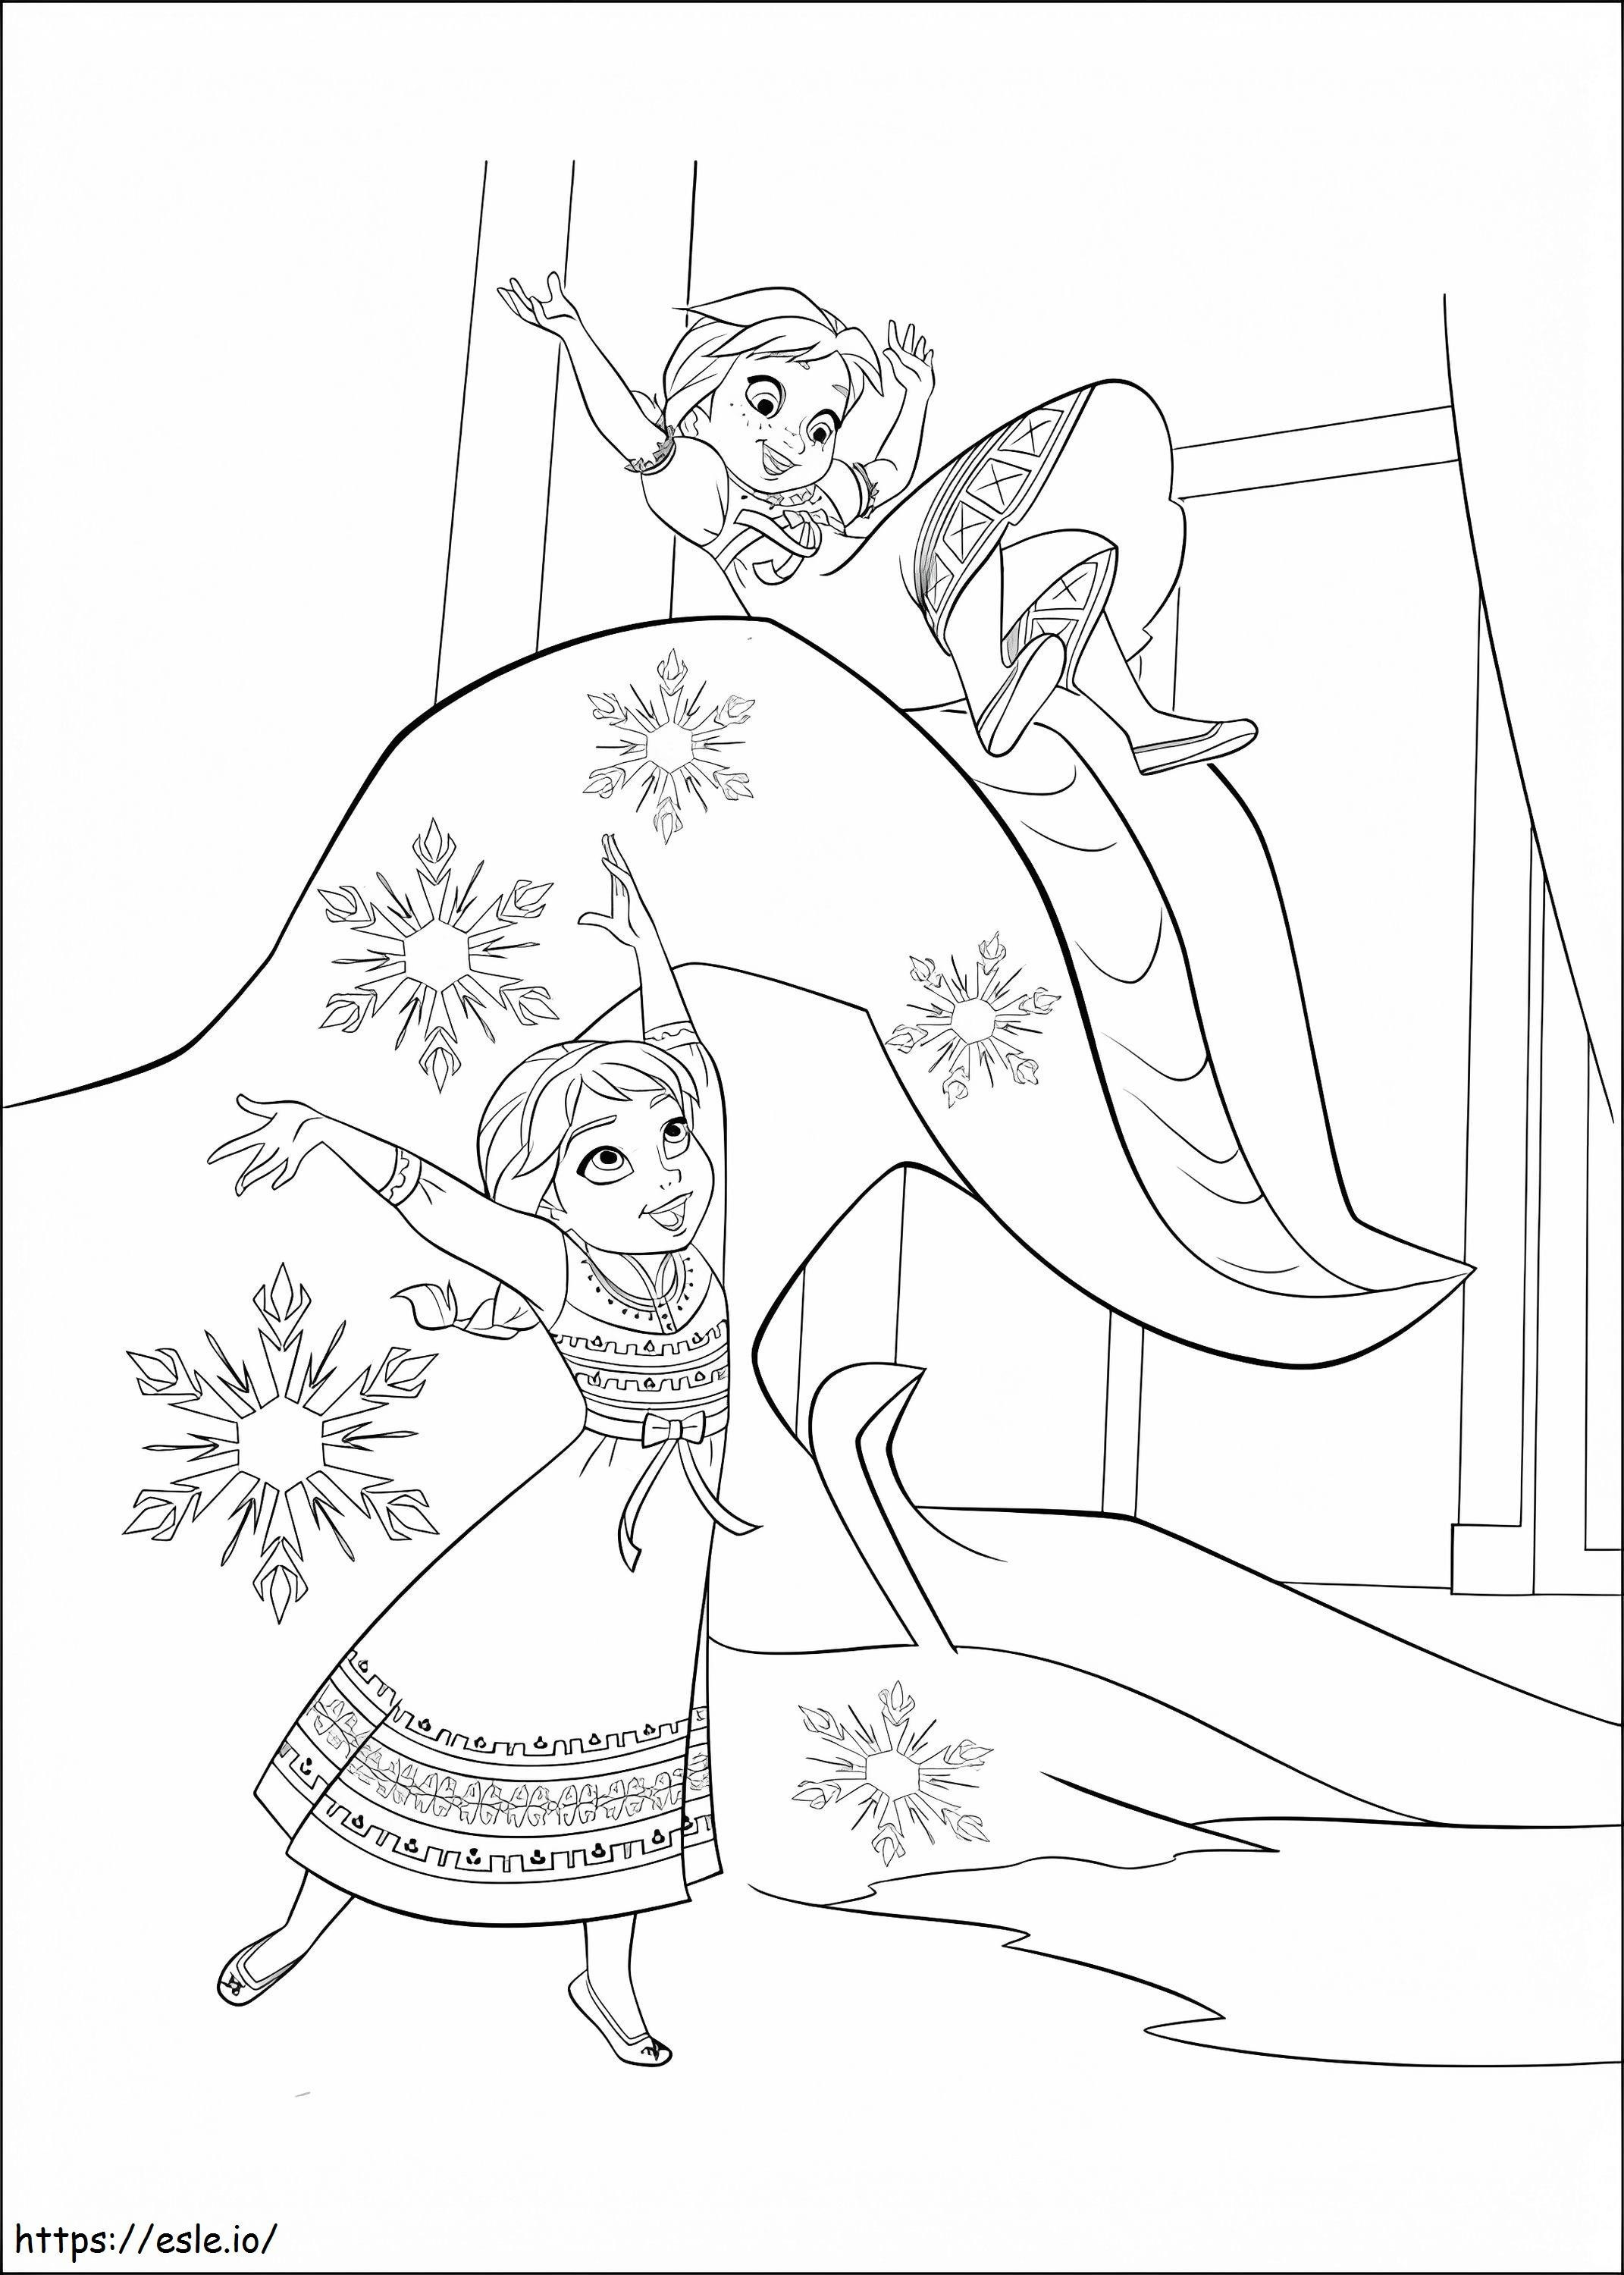 1534300626 Elsa And Anna Playing A4 coloring page